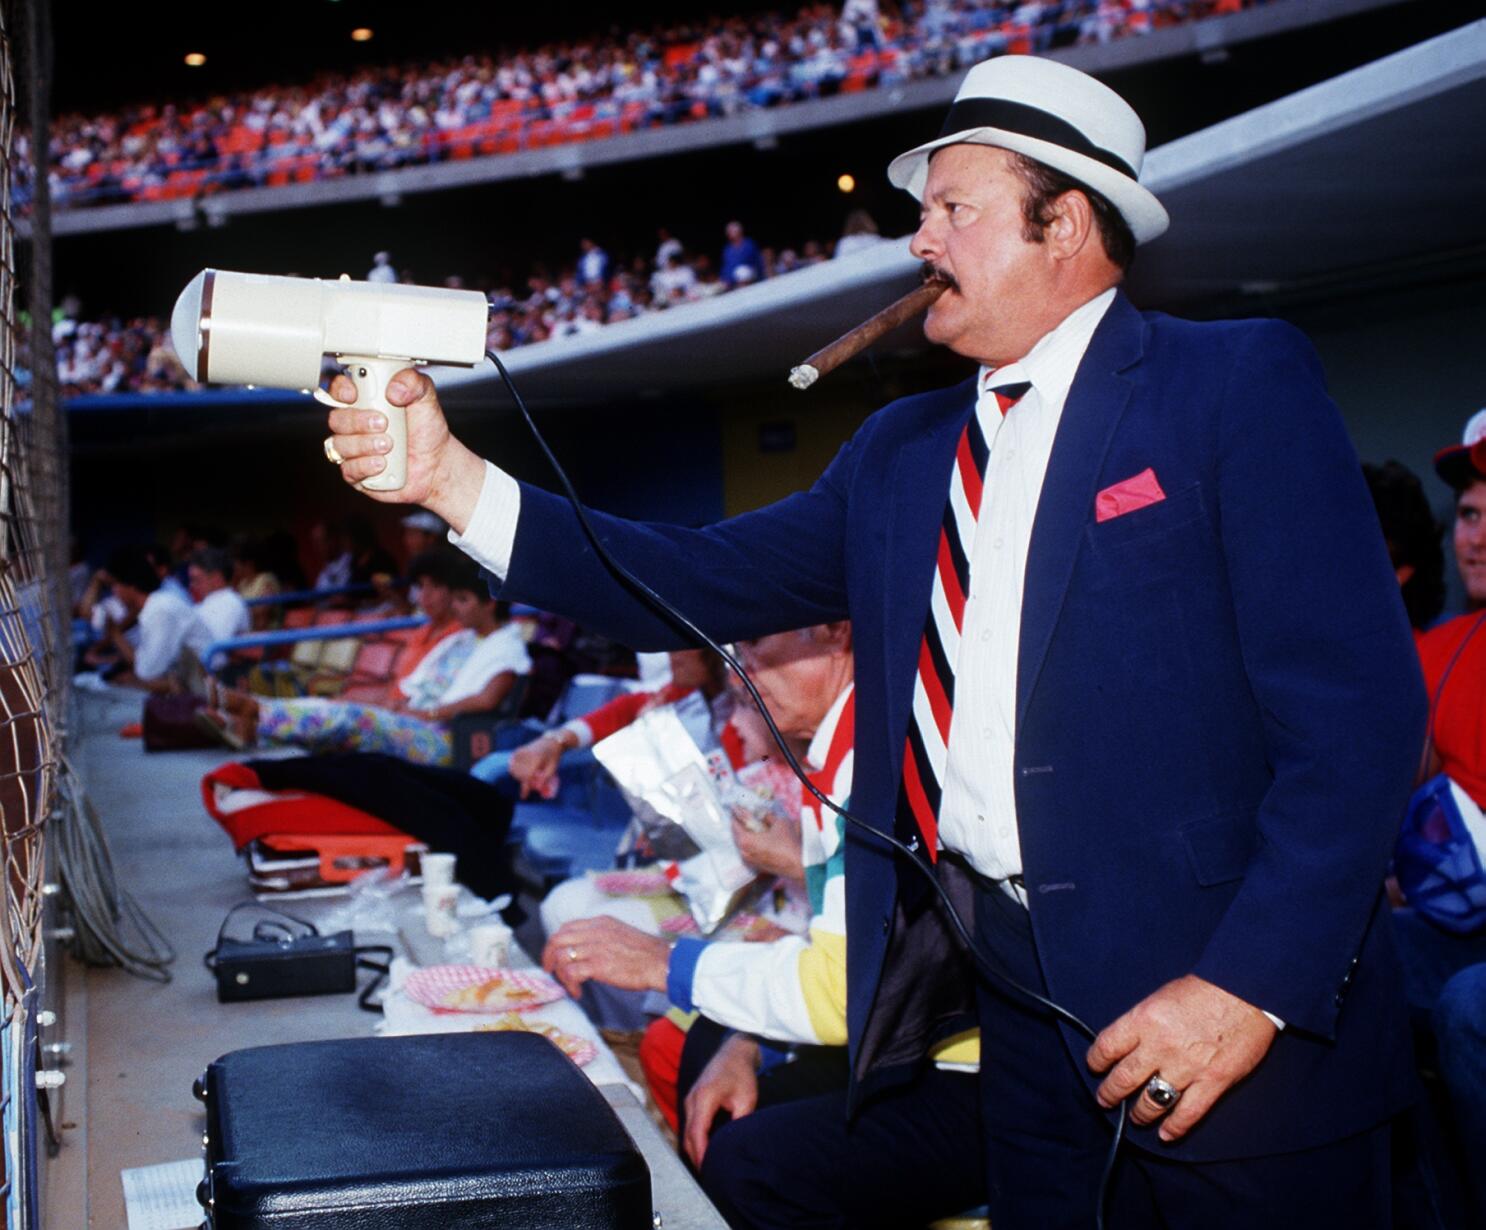 Panama hat and radar gun, Mike Brito was fixture with Dodgers